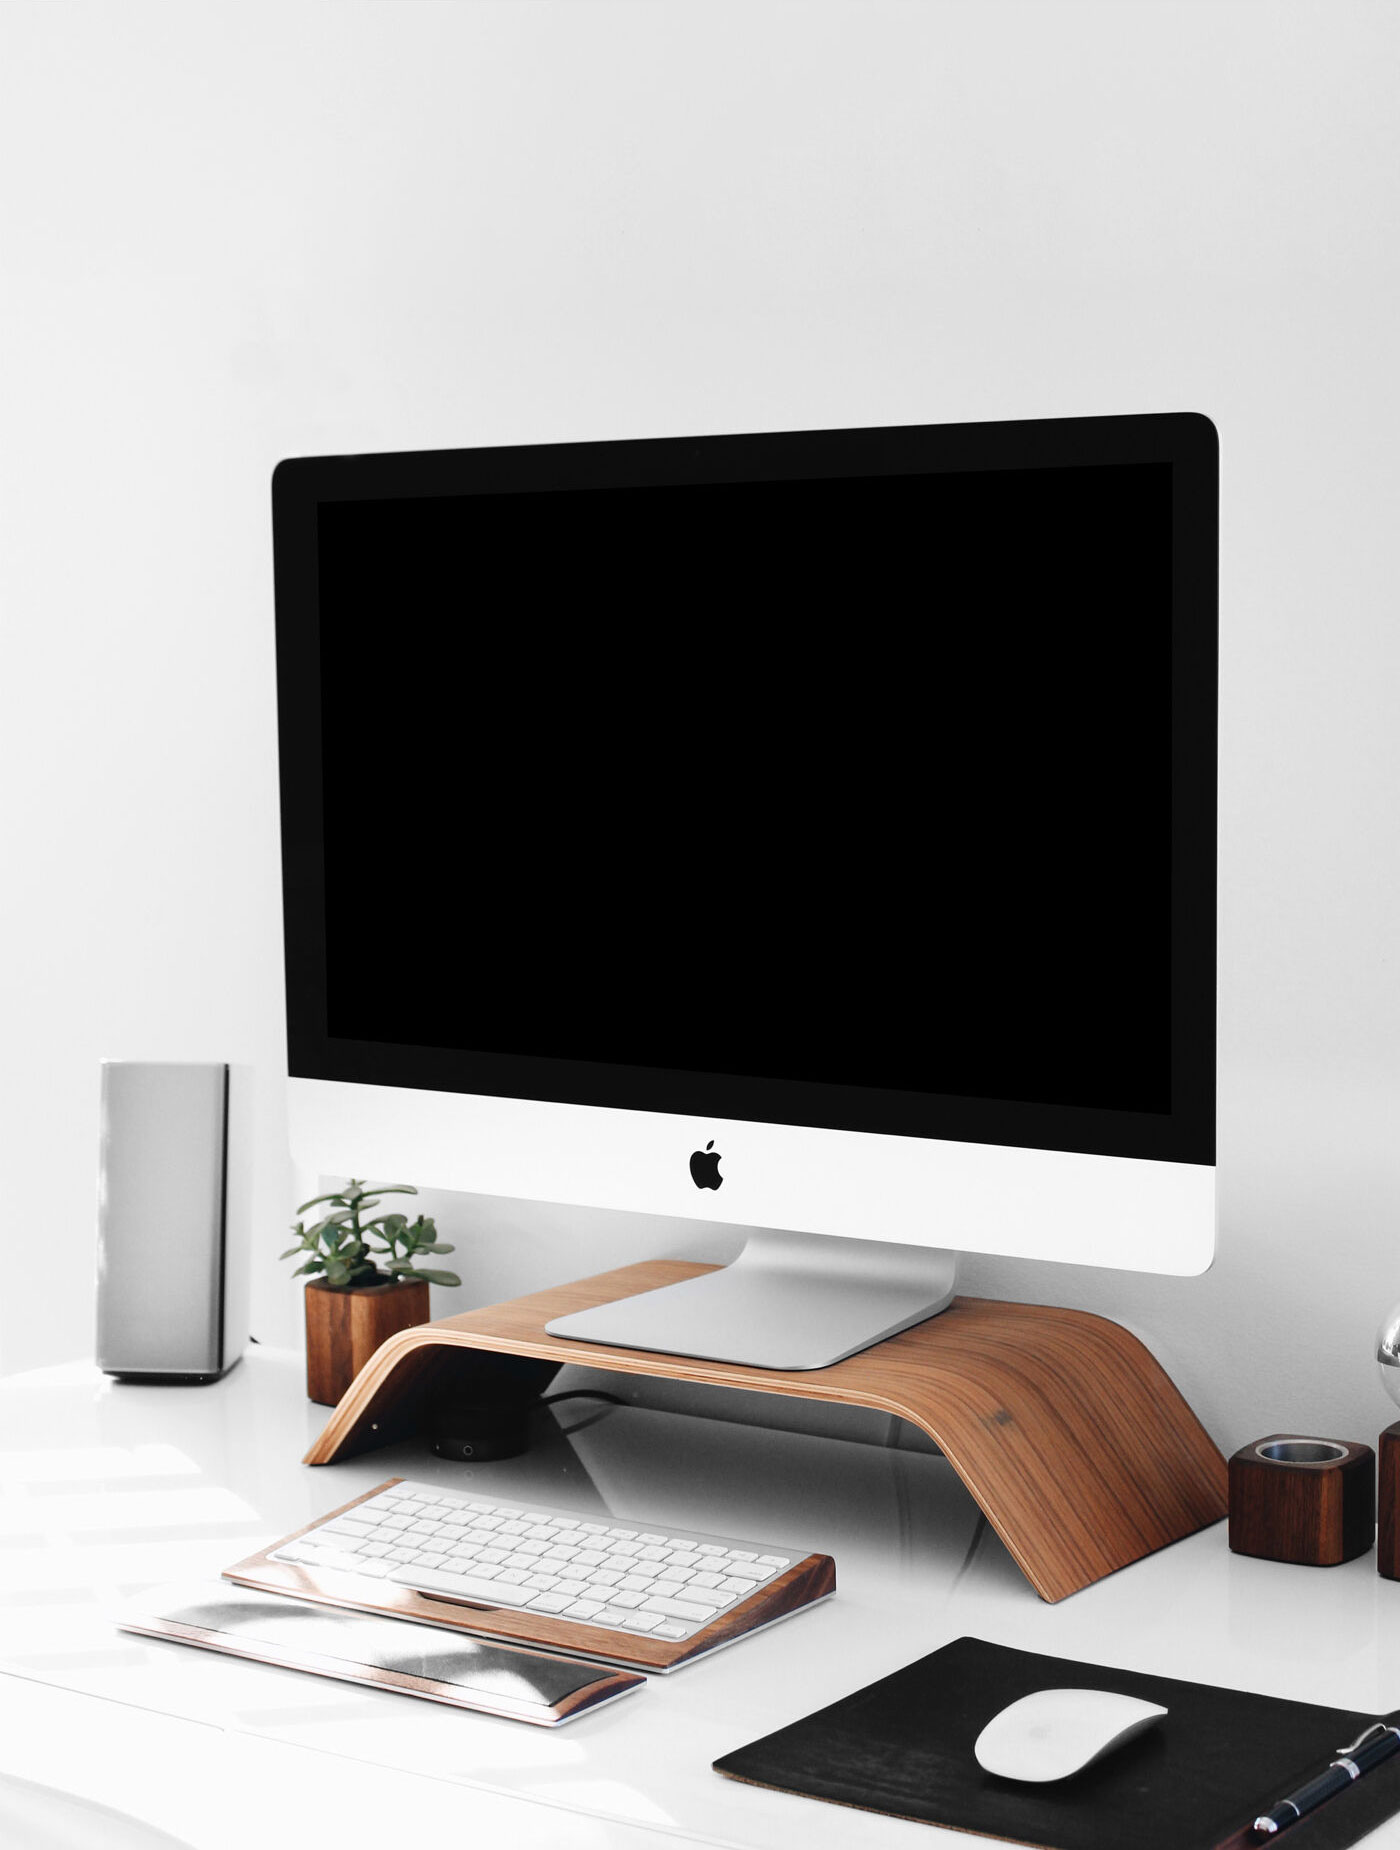 iMac on Wooden Stand on a Desk Mockup FREE PSD